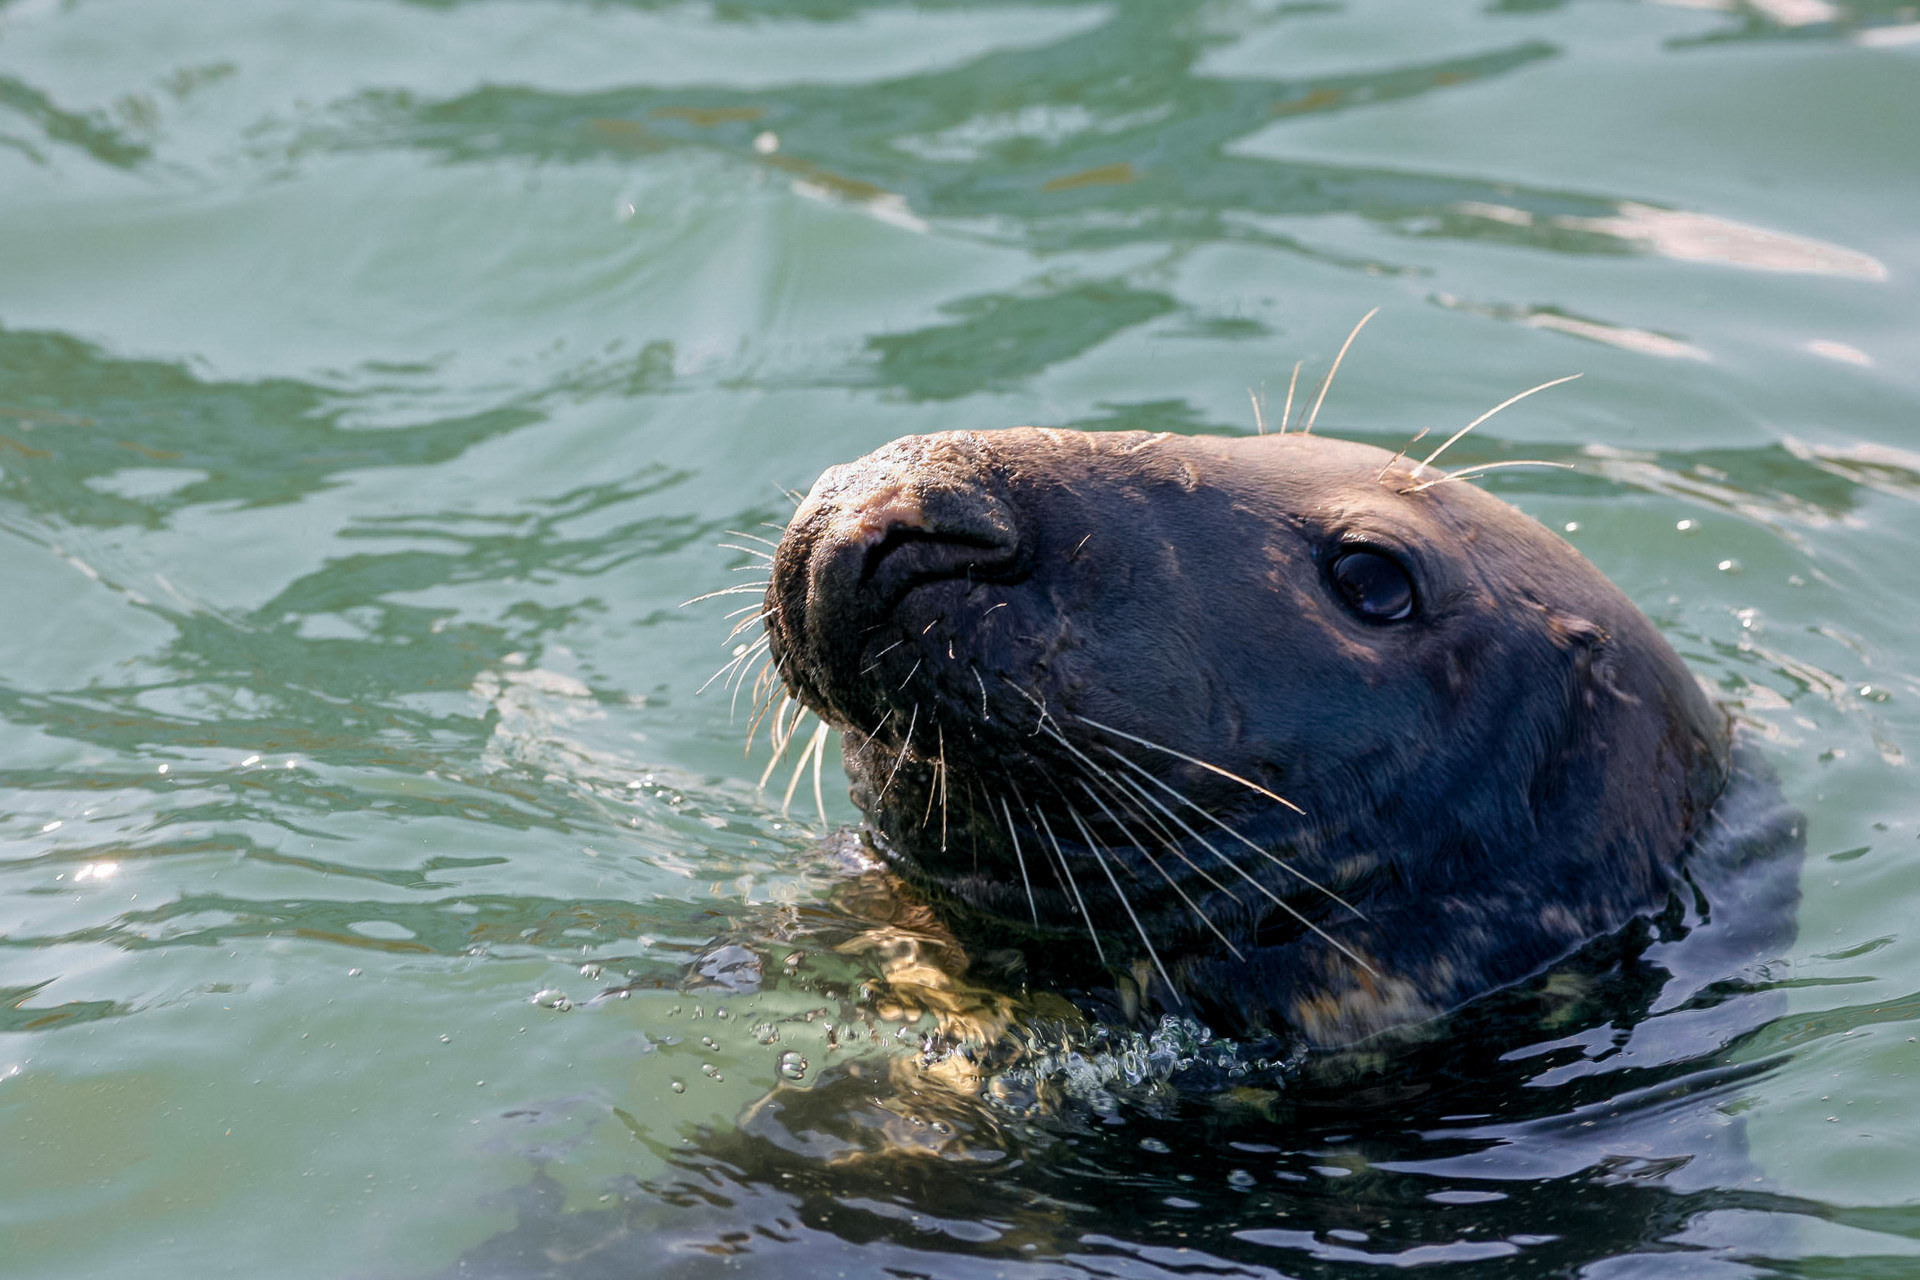 Background image - Seal in loch